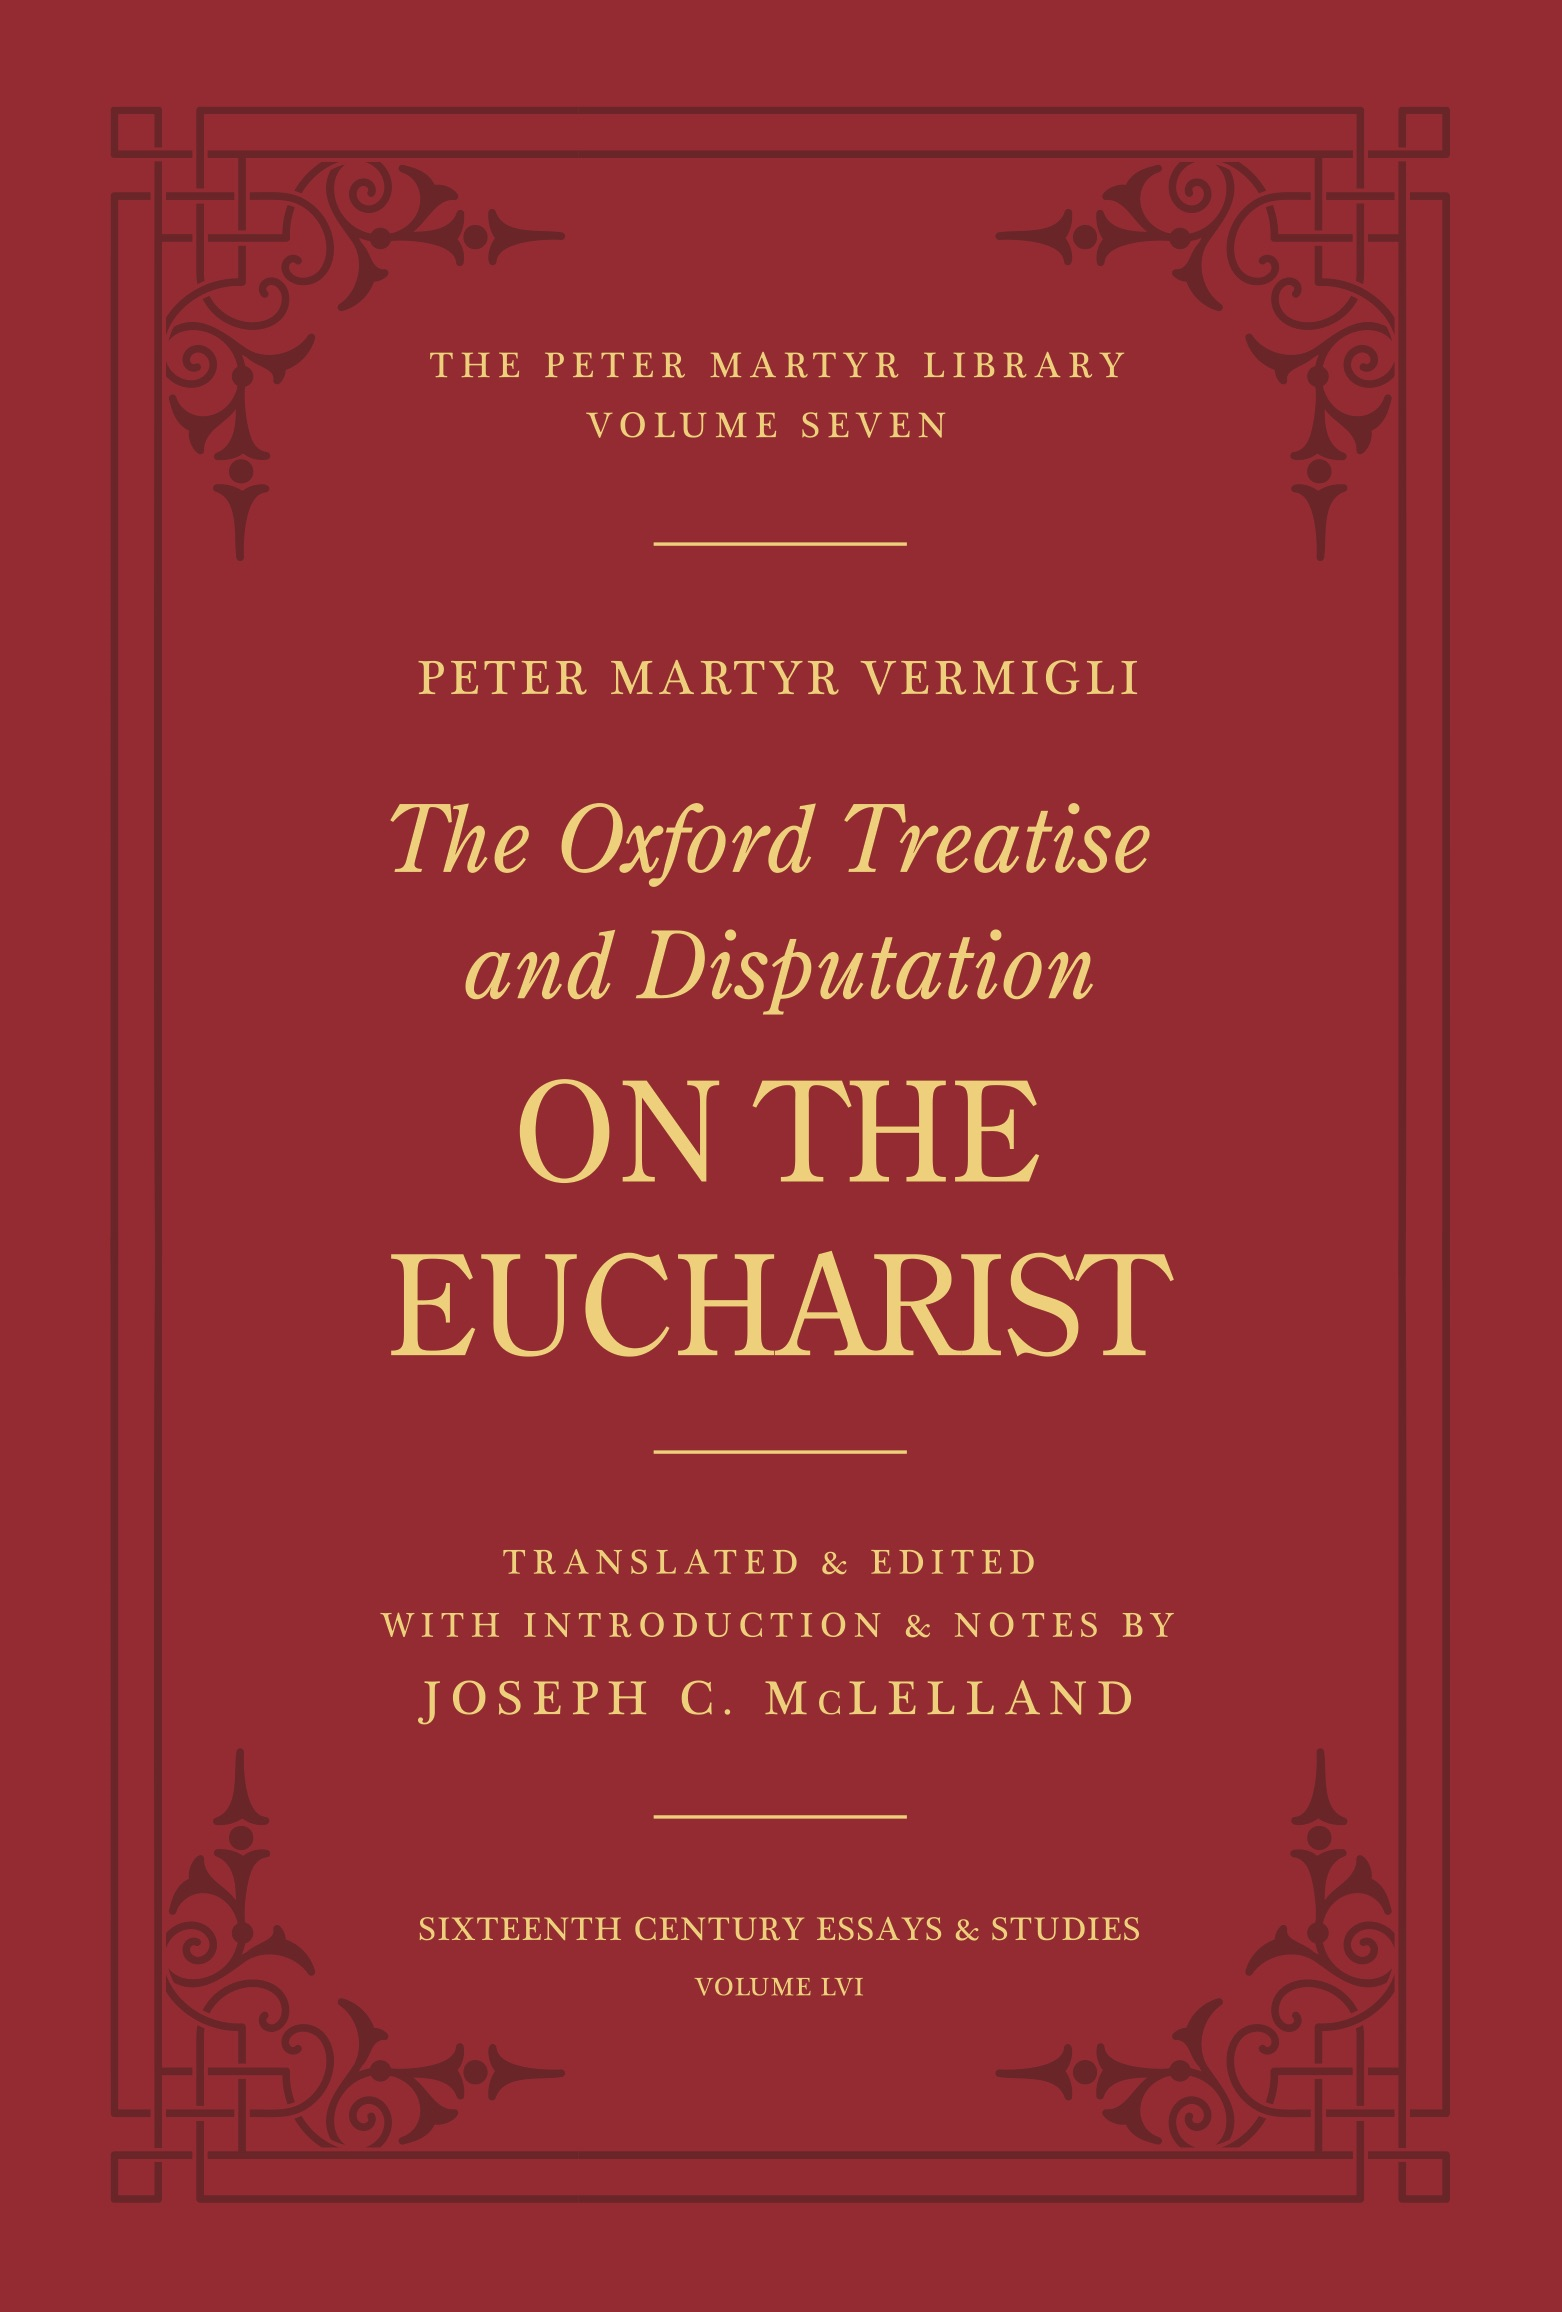 The Oxford Treatise and Disputation On the Eucharist